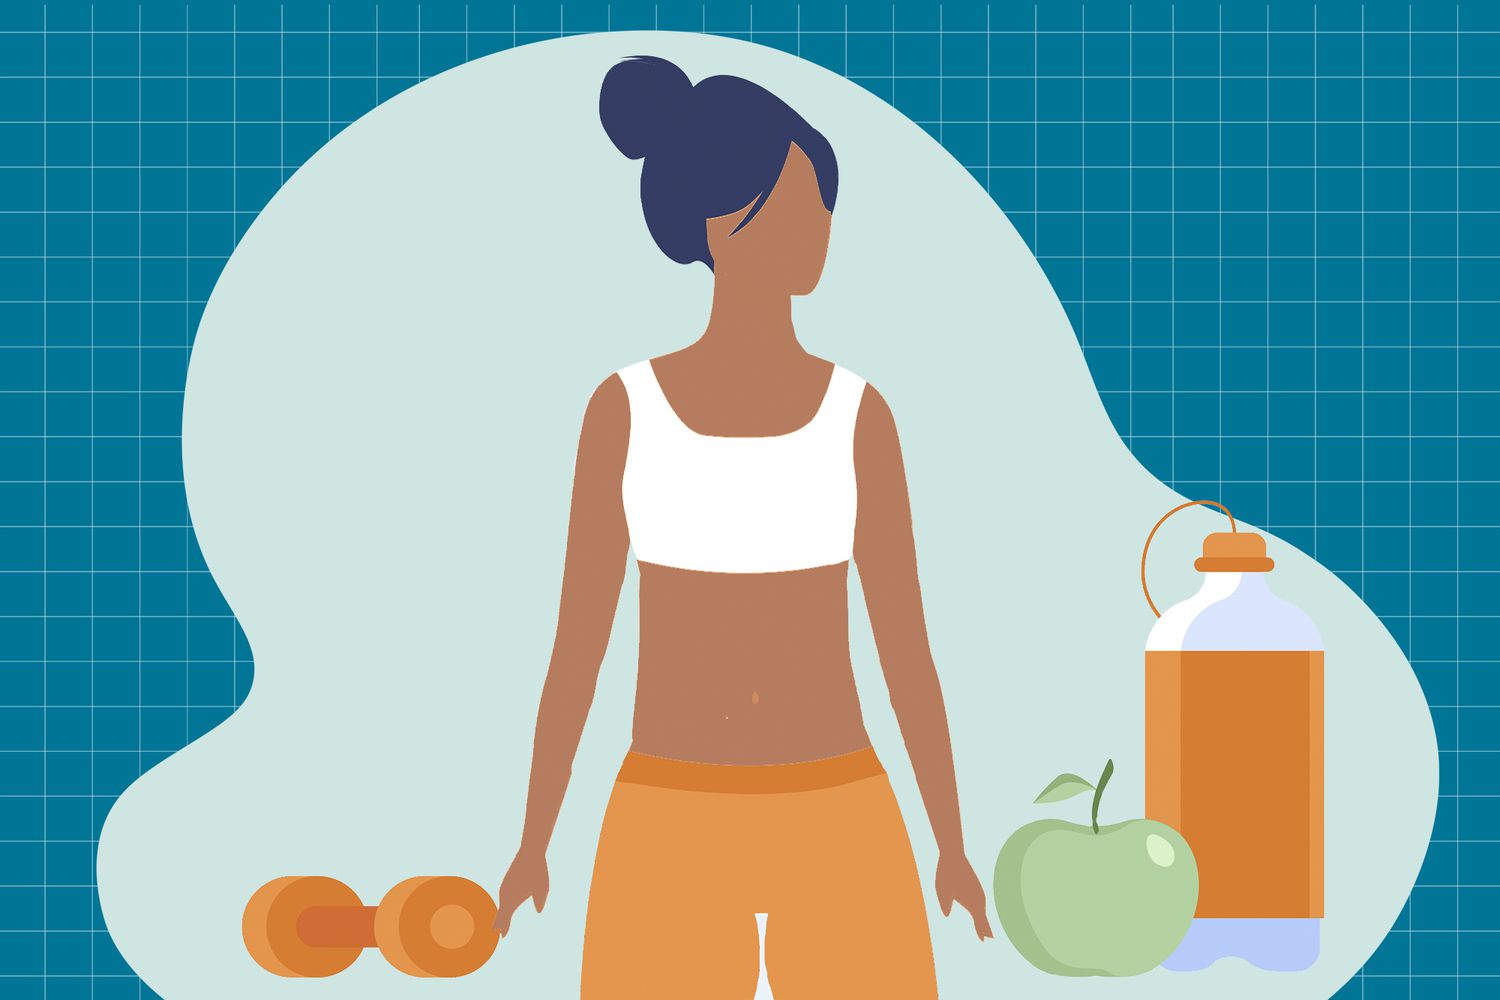 an illustration of a woman with weights, fruit, and water